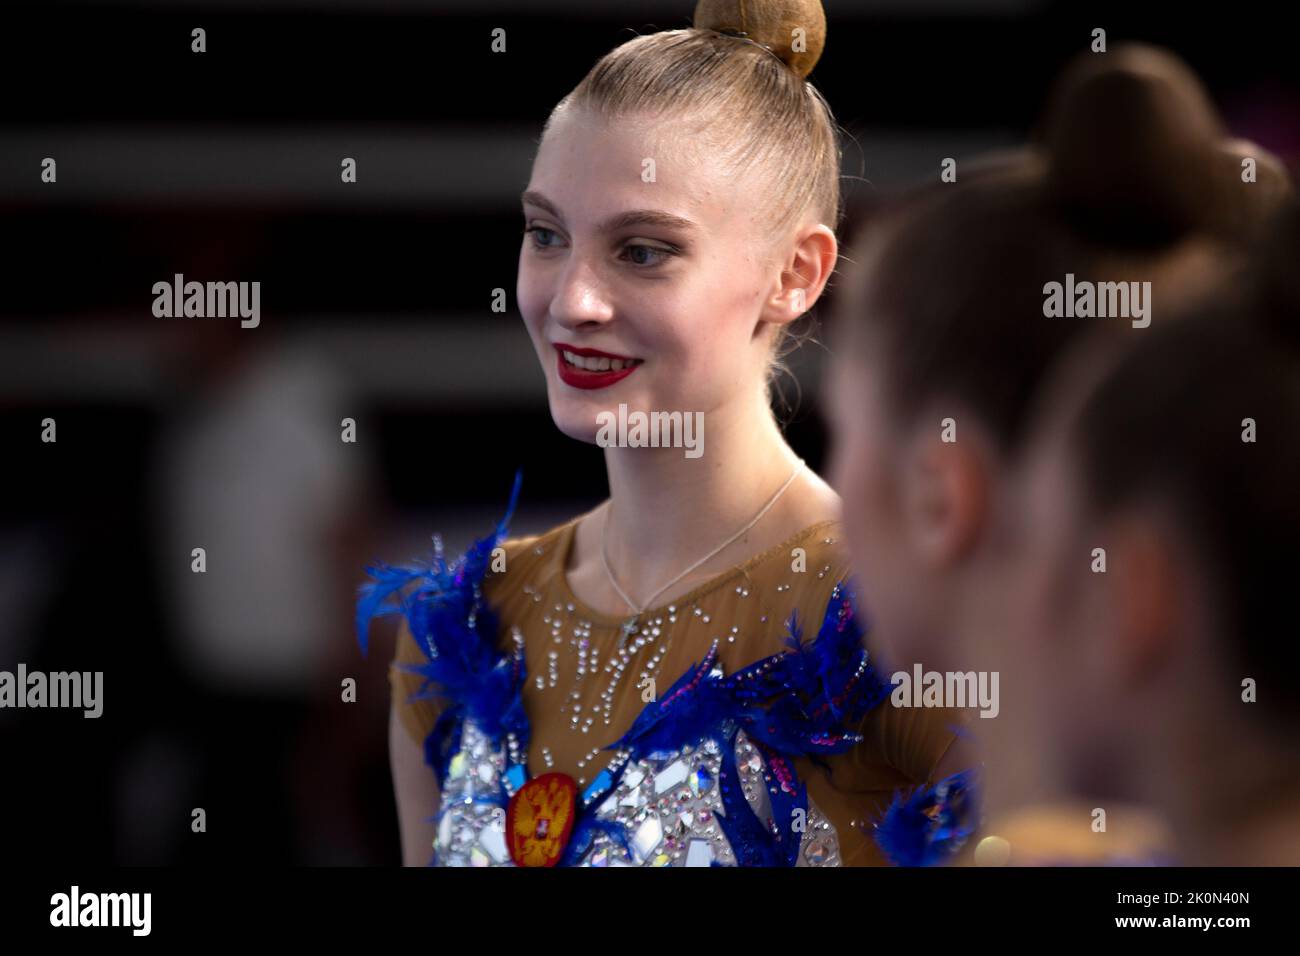 Moscow, Russia. 12th of September, 2022. Athletes of the Russian national team perform in a qualification at the 2022 All-Russian Summer Spartakiad in Rhythmic Gymnastics at Irina Viner-Usmanova Gymnastics Palace in Luzhniki in Moscow, Russia. Nikolay Vinokurov/Alamy Live News Stock Photo